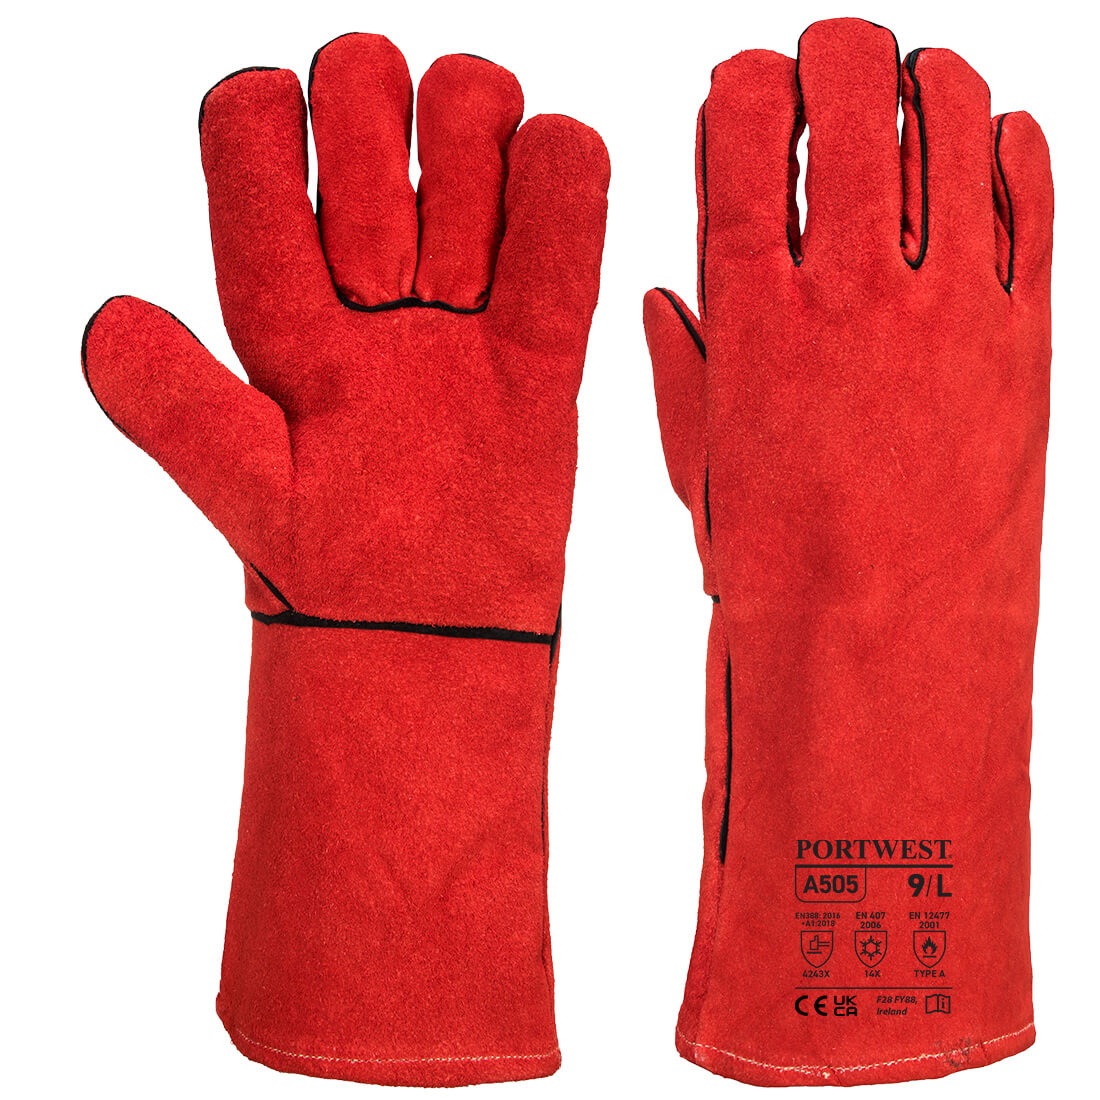 Winter Welding Gauntlet Size XL Red Re-usable Gloves A505RERXL